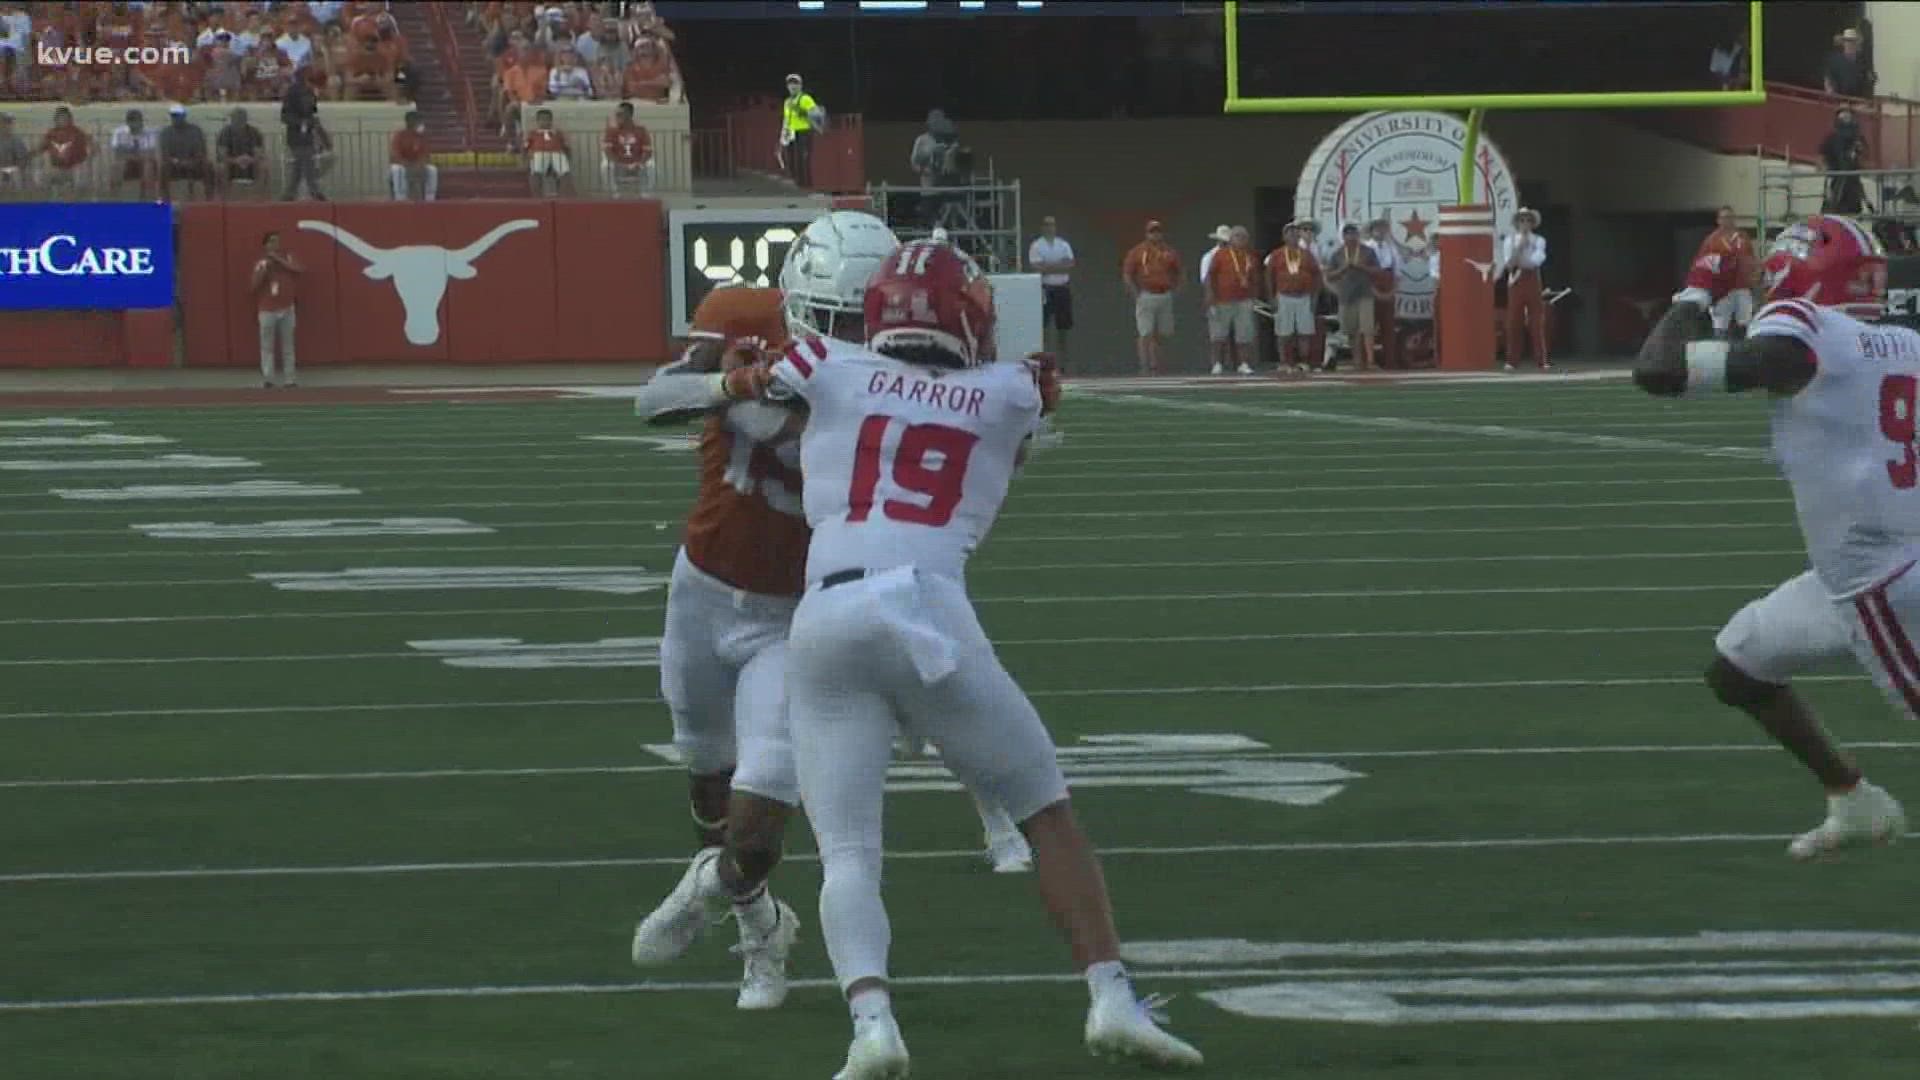 Hudson Card was named the Longhorn's starting quarterback, but Casey Thompson is also playing during the games.